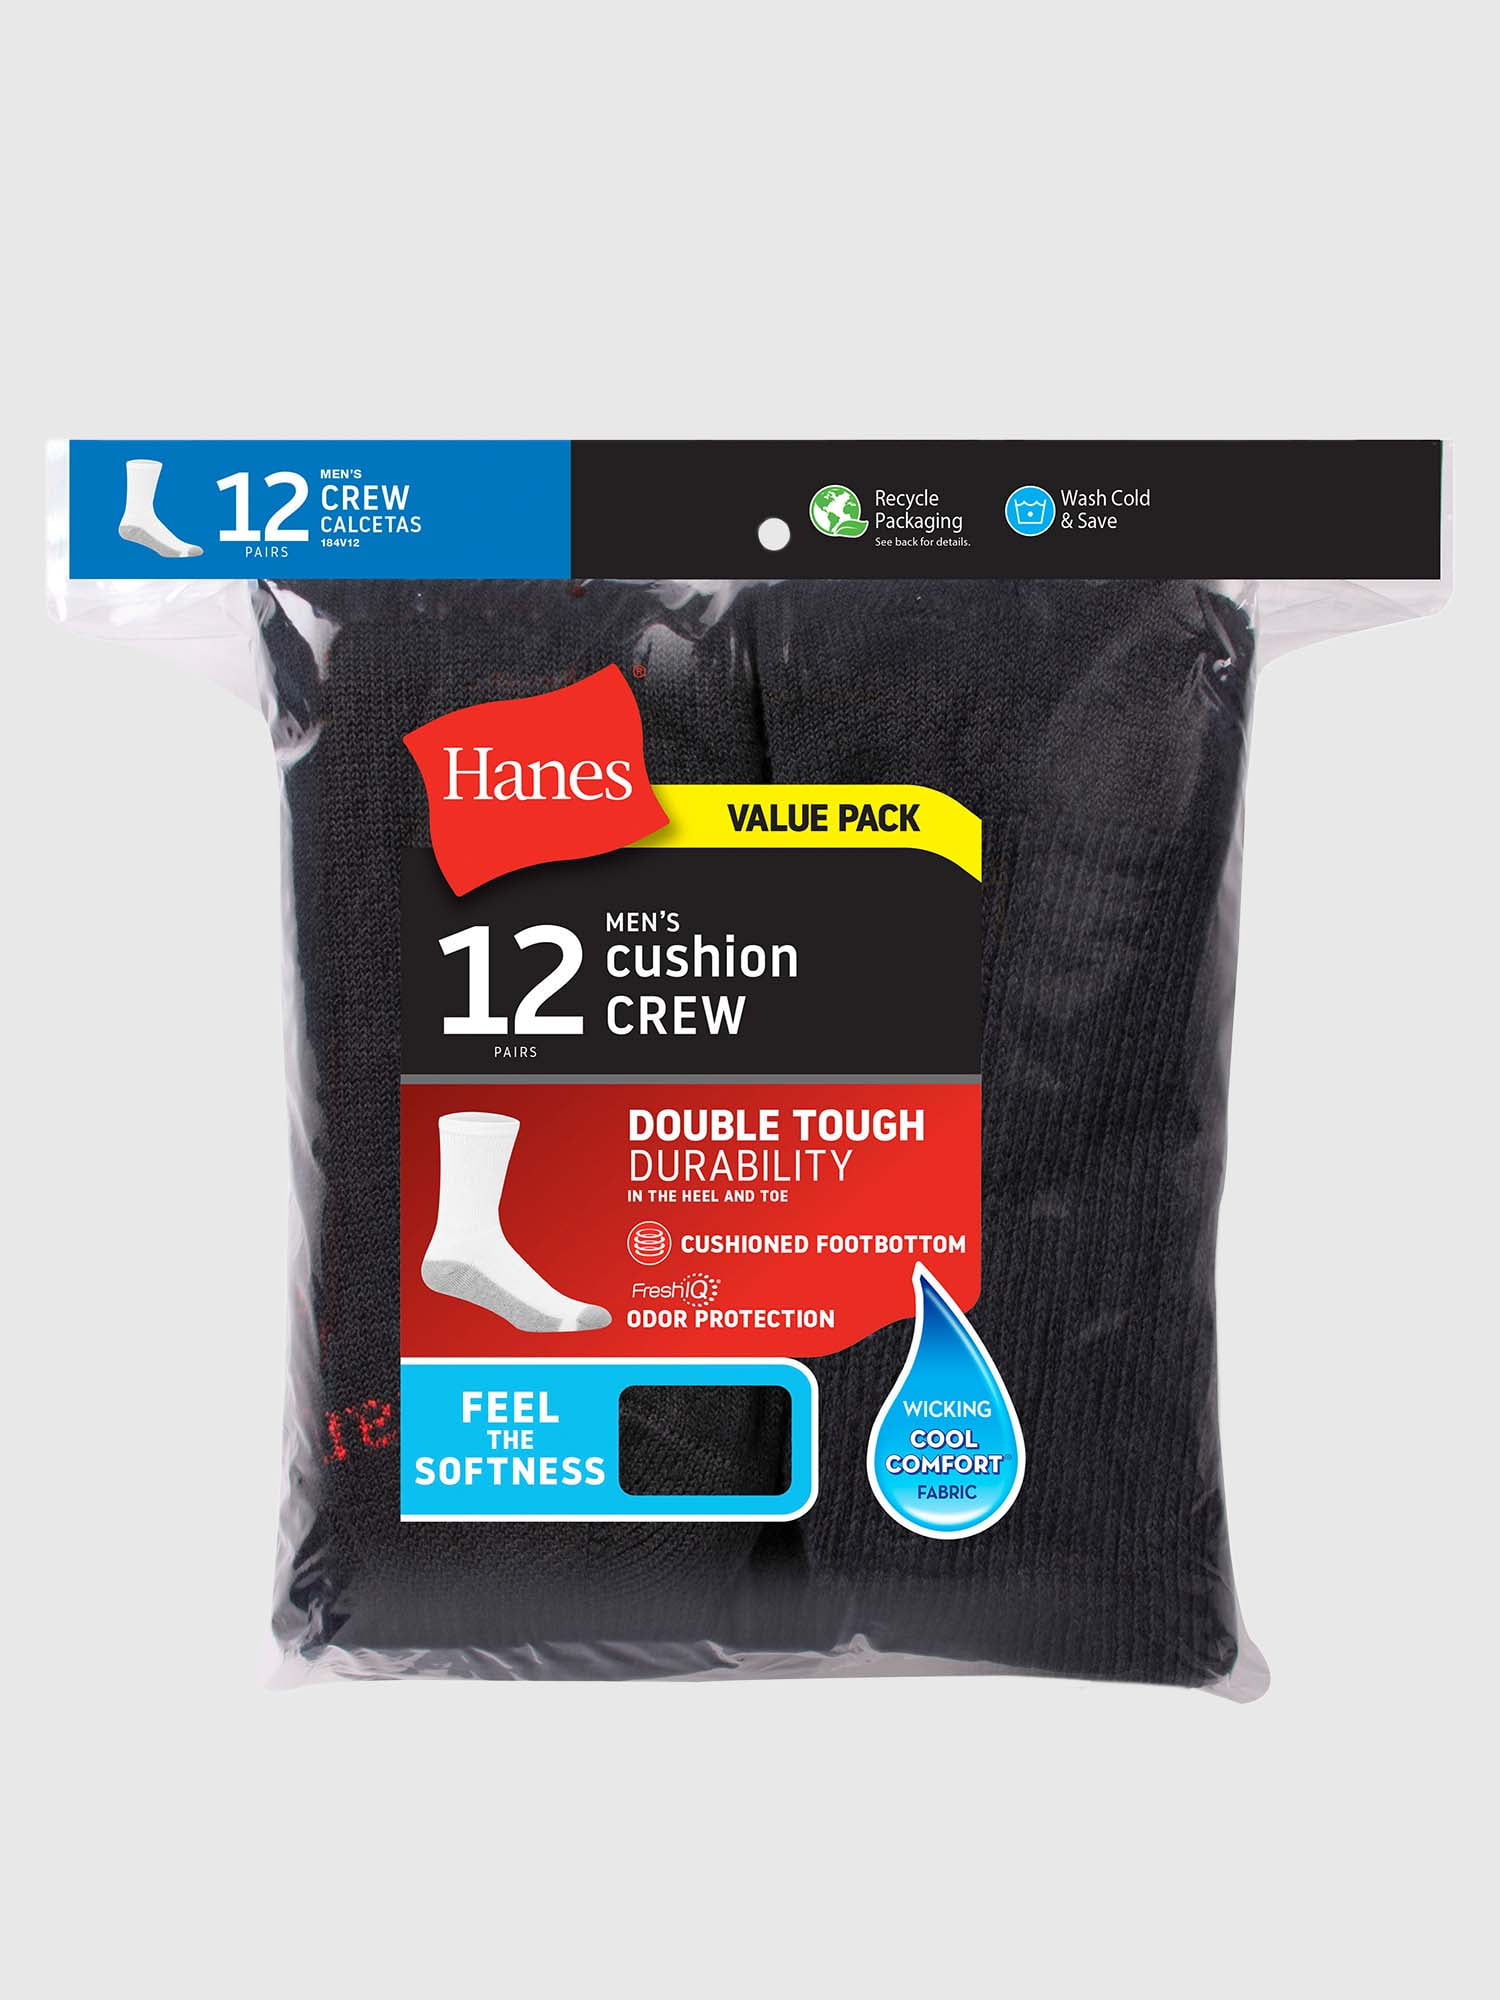 Hanes Ultimate mens Socks, 6-pair Hanes Ultimate Men s 6 Pack Ultra Cushion  FreshIQ Odor Control with Wicking Ankle Socks Black, Black, One Size US at   Men's Clothing store